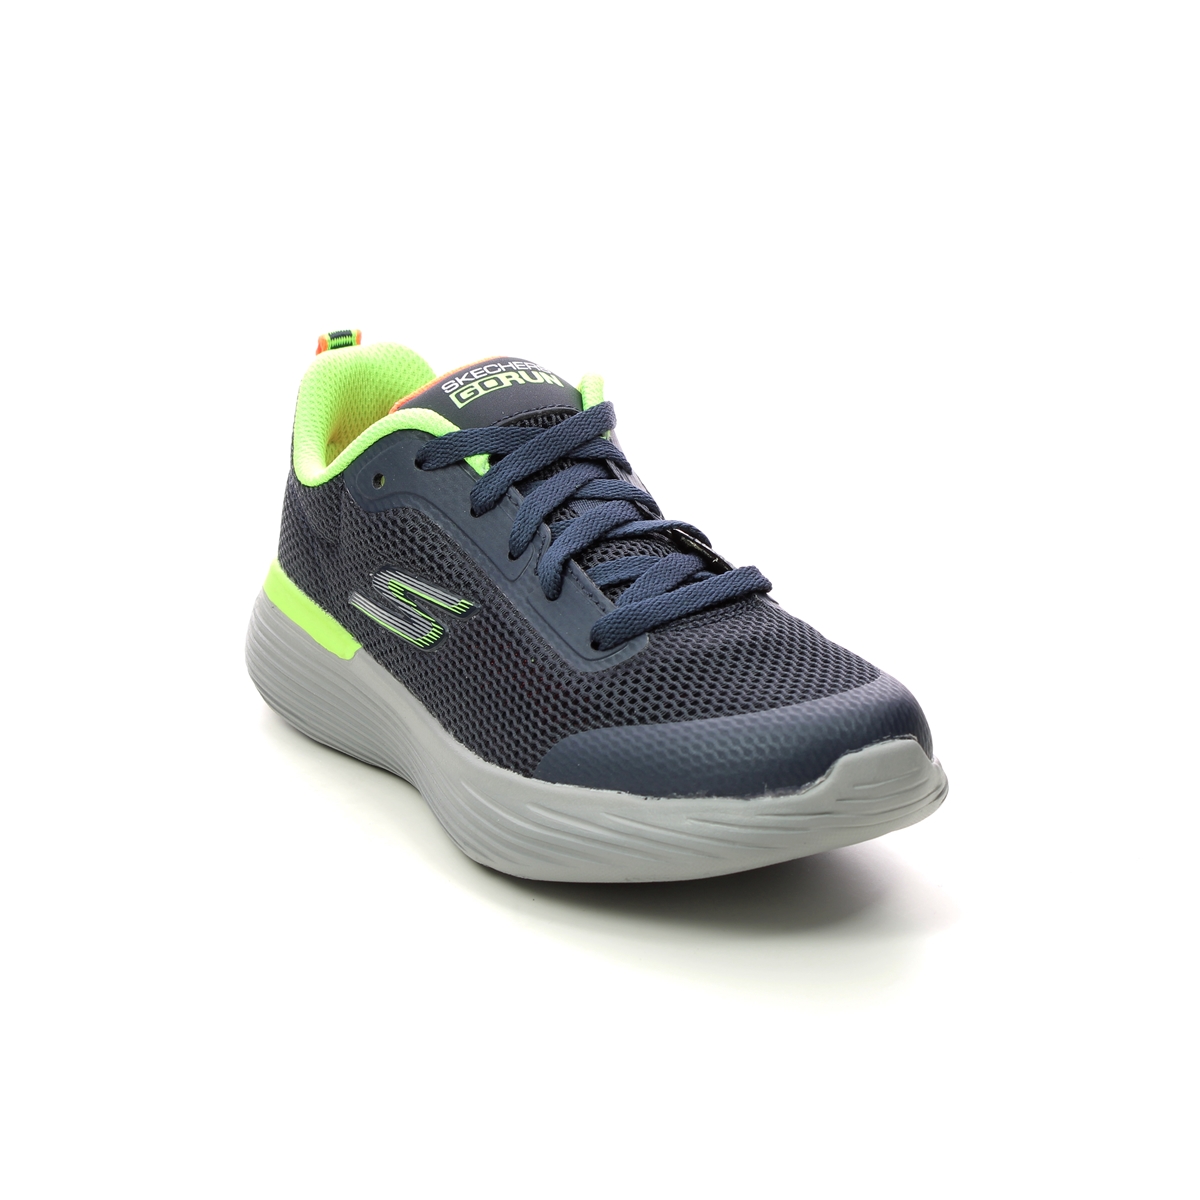 Skechers Go Run 400 Lace Navy Lime Kids Trainers 405100L In Size 37 In Plain Navy Lime For kids